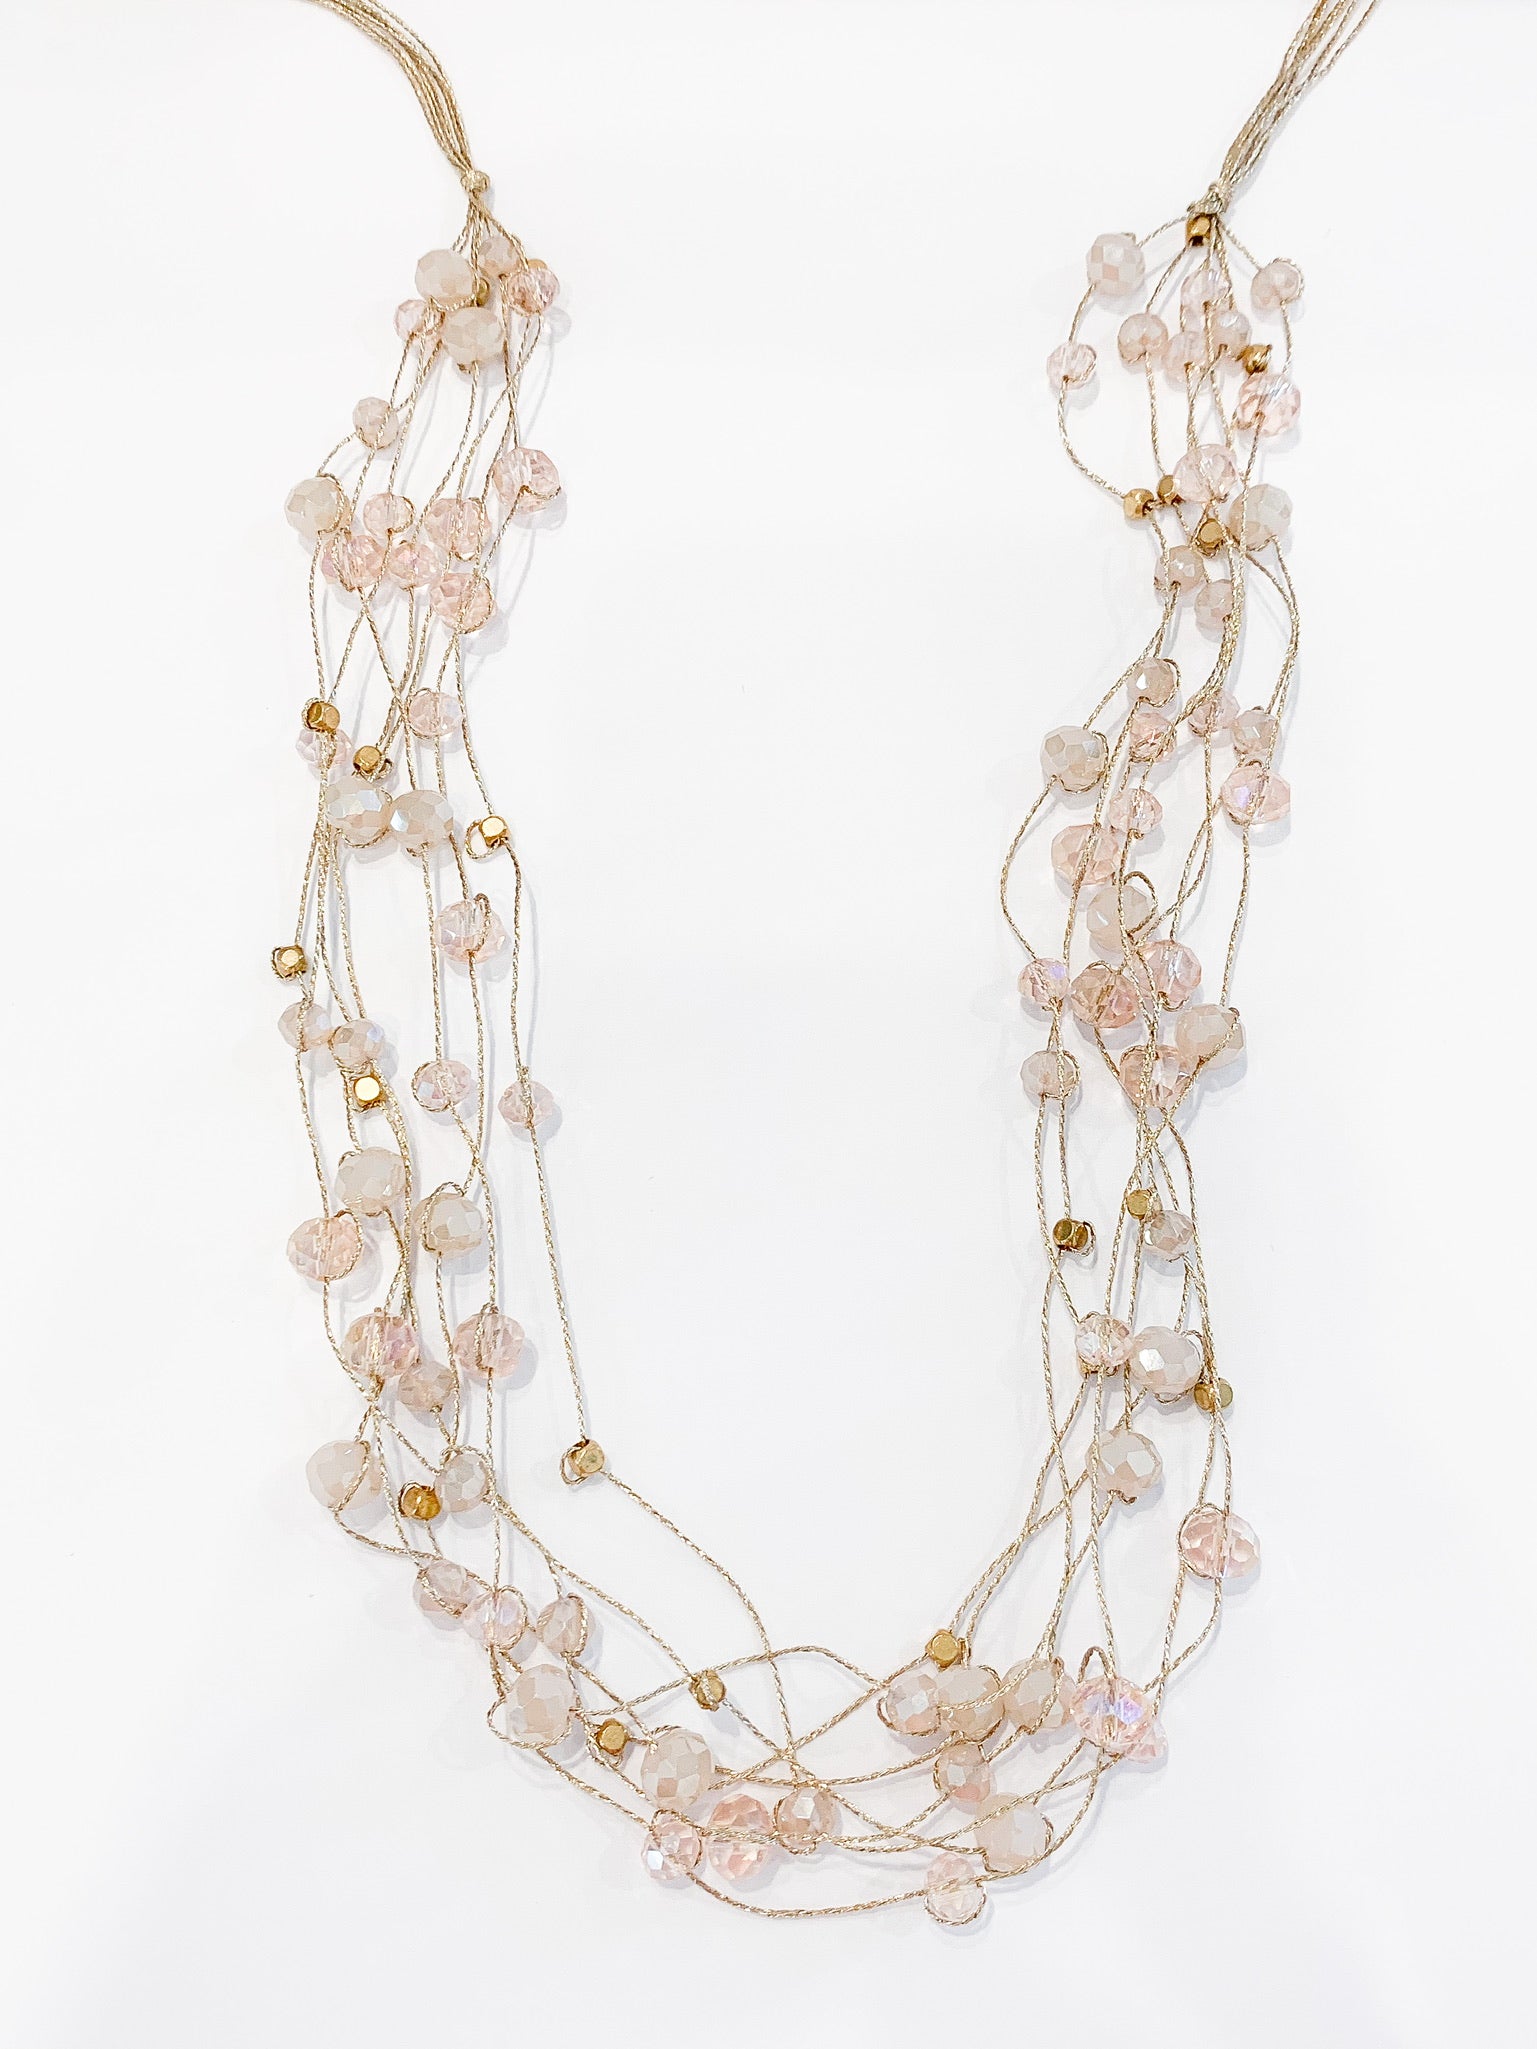 Stella beaded necklace in blush. Multiple strands of scattered beads